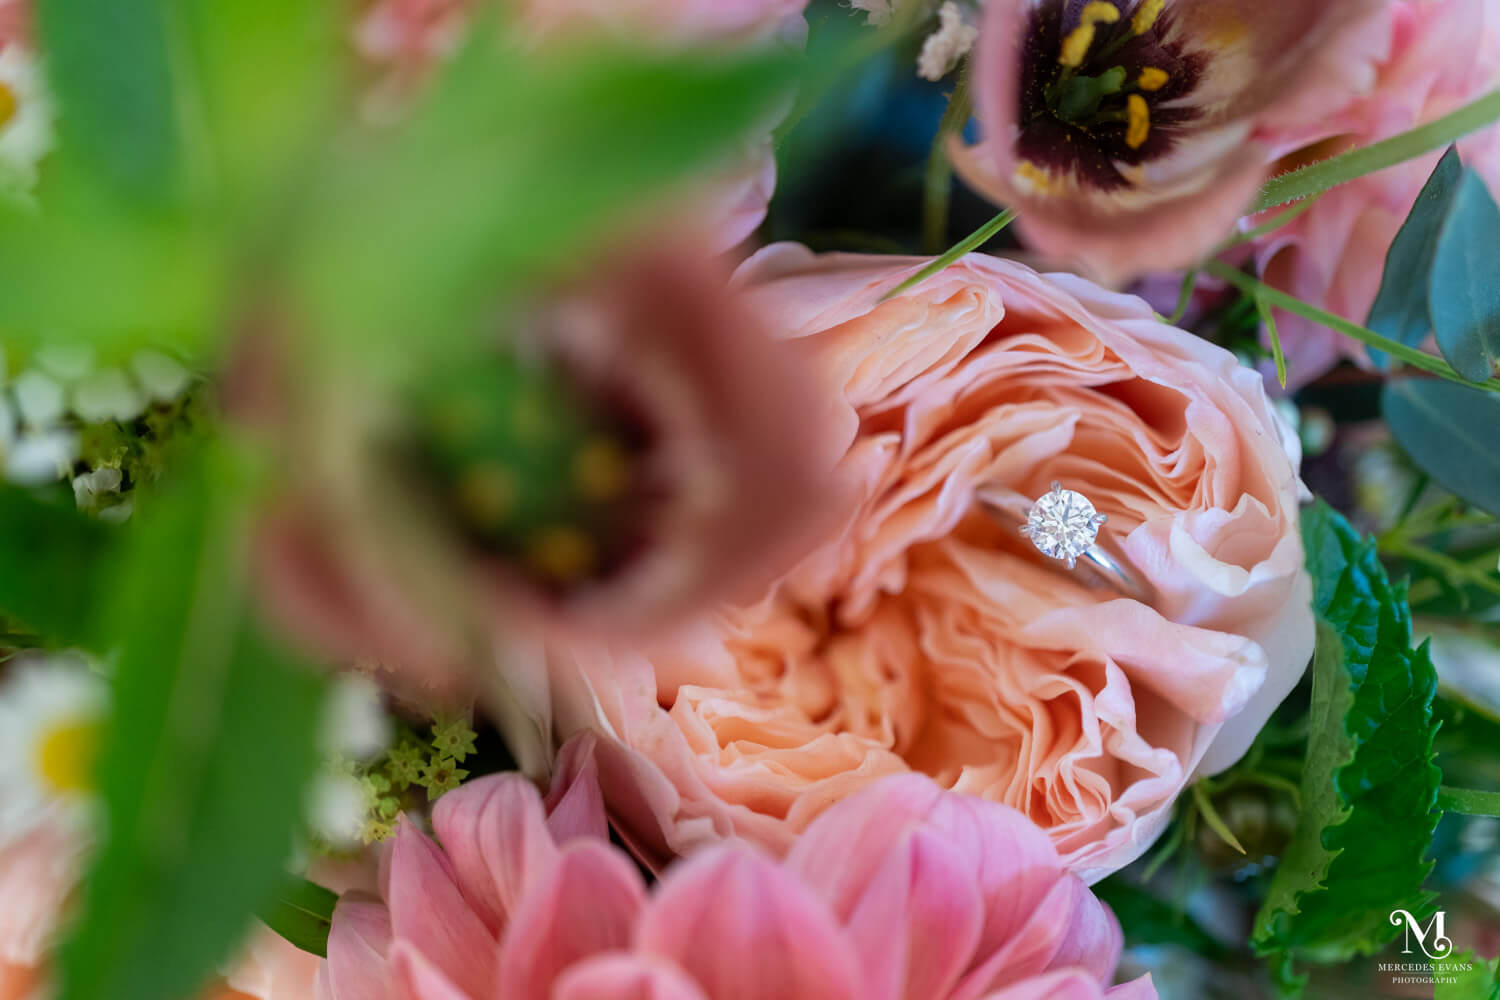 a solitaire diamond ring is nestled in the petals of an apricot david austen rose in a bouquet with dusky pink tulips, eucalyptus, daisies and green foliage